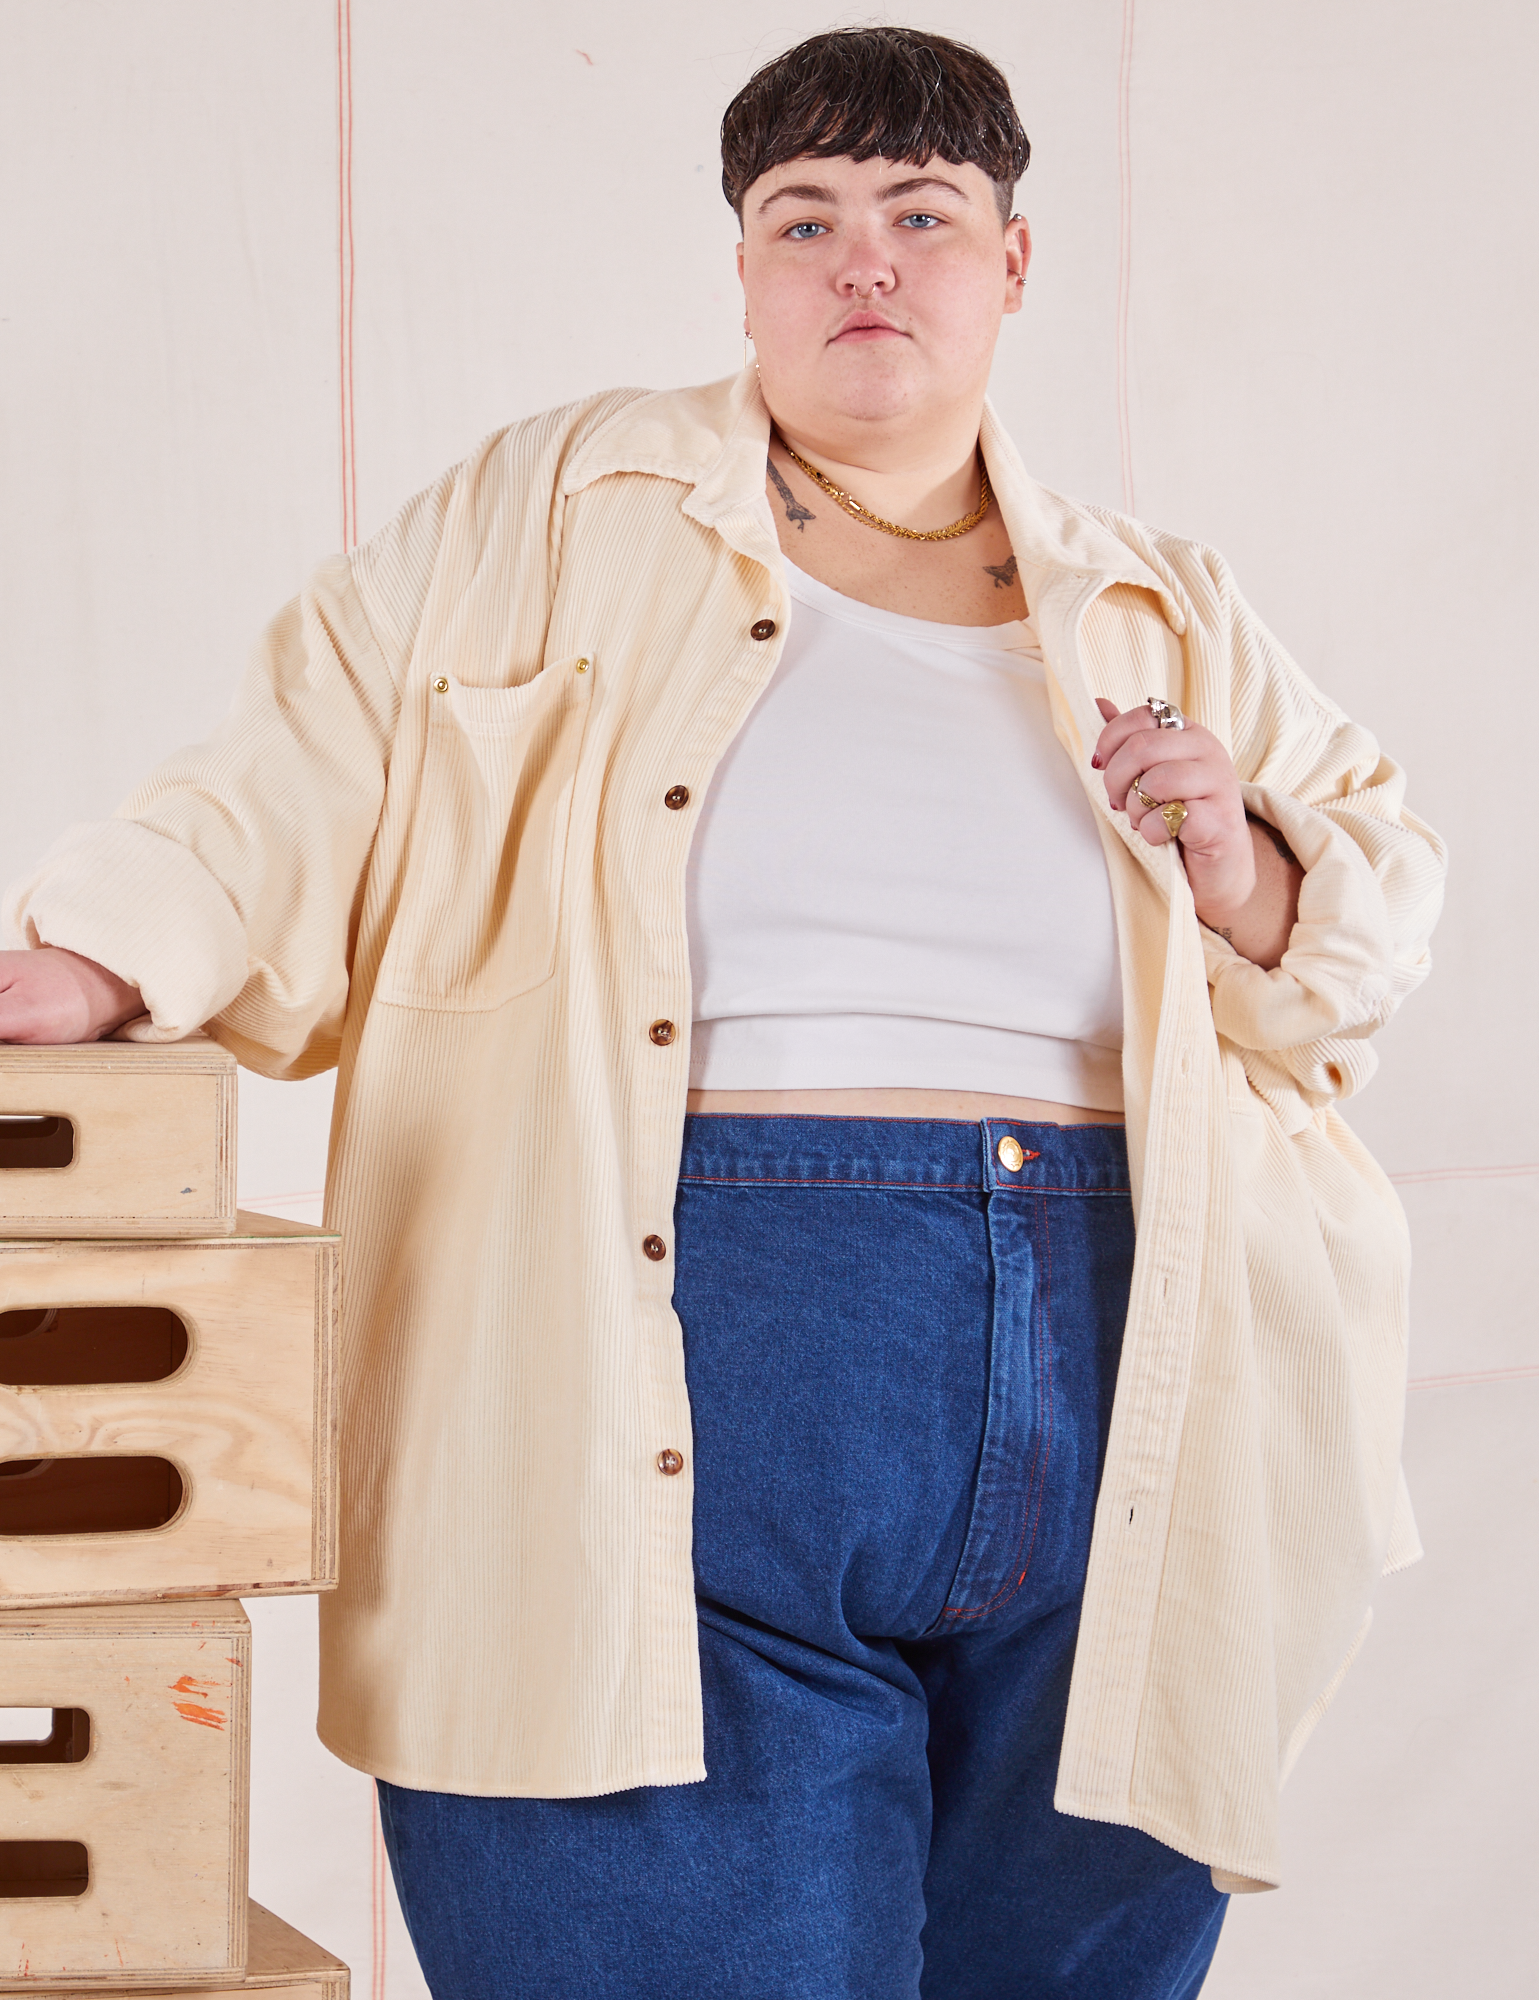 Jordan is 5&#39;4&quot; and wearing 4XL Corduroy Overshirt in Vintage Off-White with a vintage off-white Cropped Tank Tp underneath and dark wash Trouser Jeans